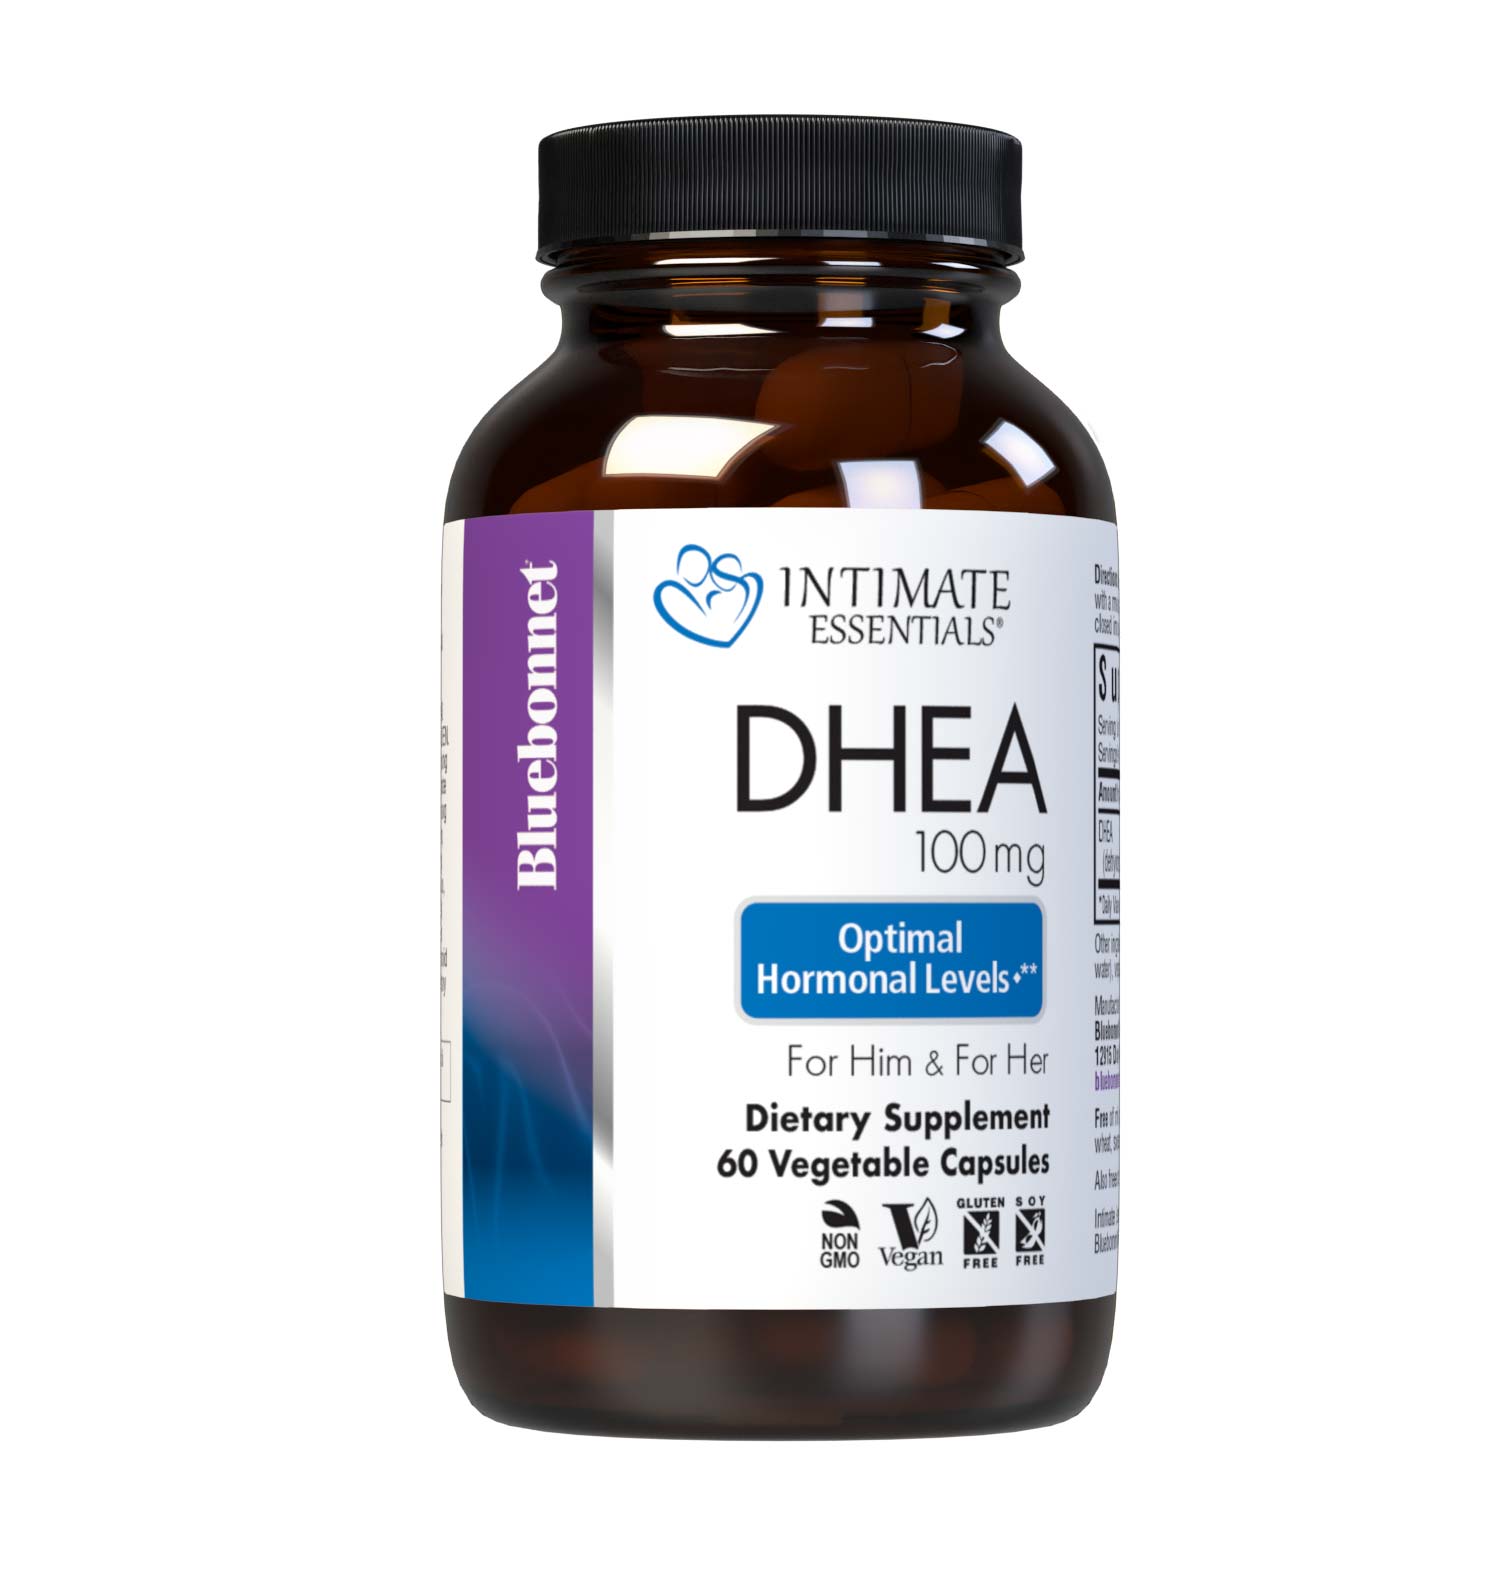 Bluebonnet’s Intimate Essentials DHEA 100 mg Vegetable Capsules derived from wild yams are specially formulated to support DHEA levels within the normal range for healthy sexual and fertility function in both men and women. #size_60 count